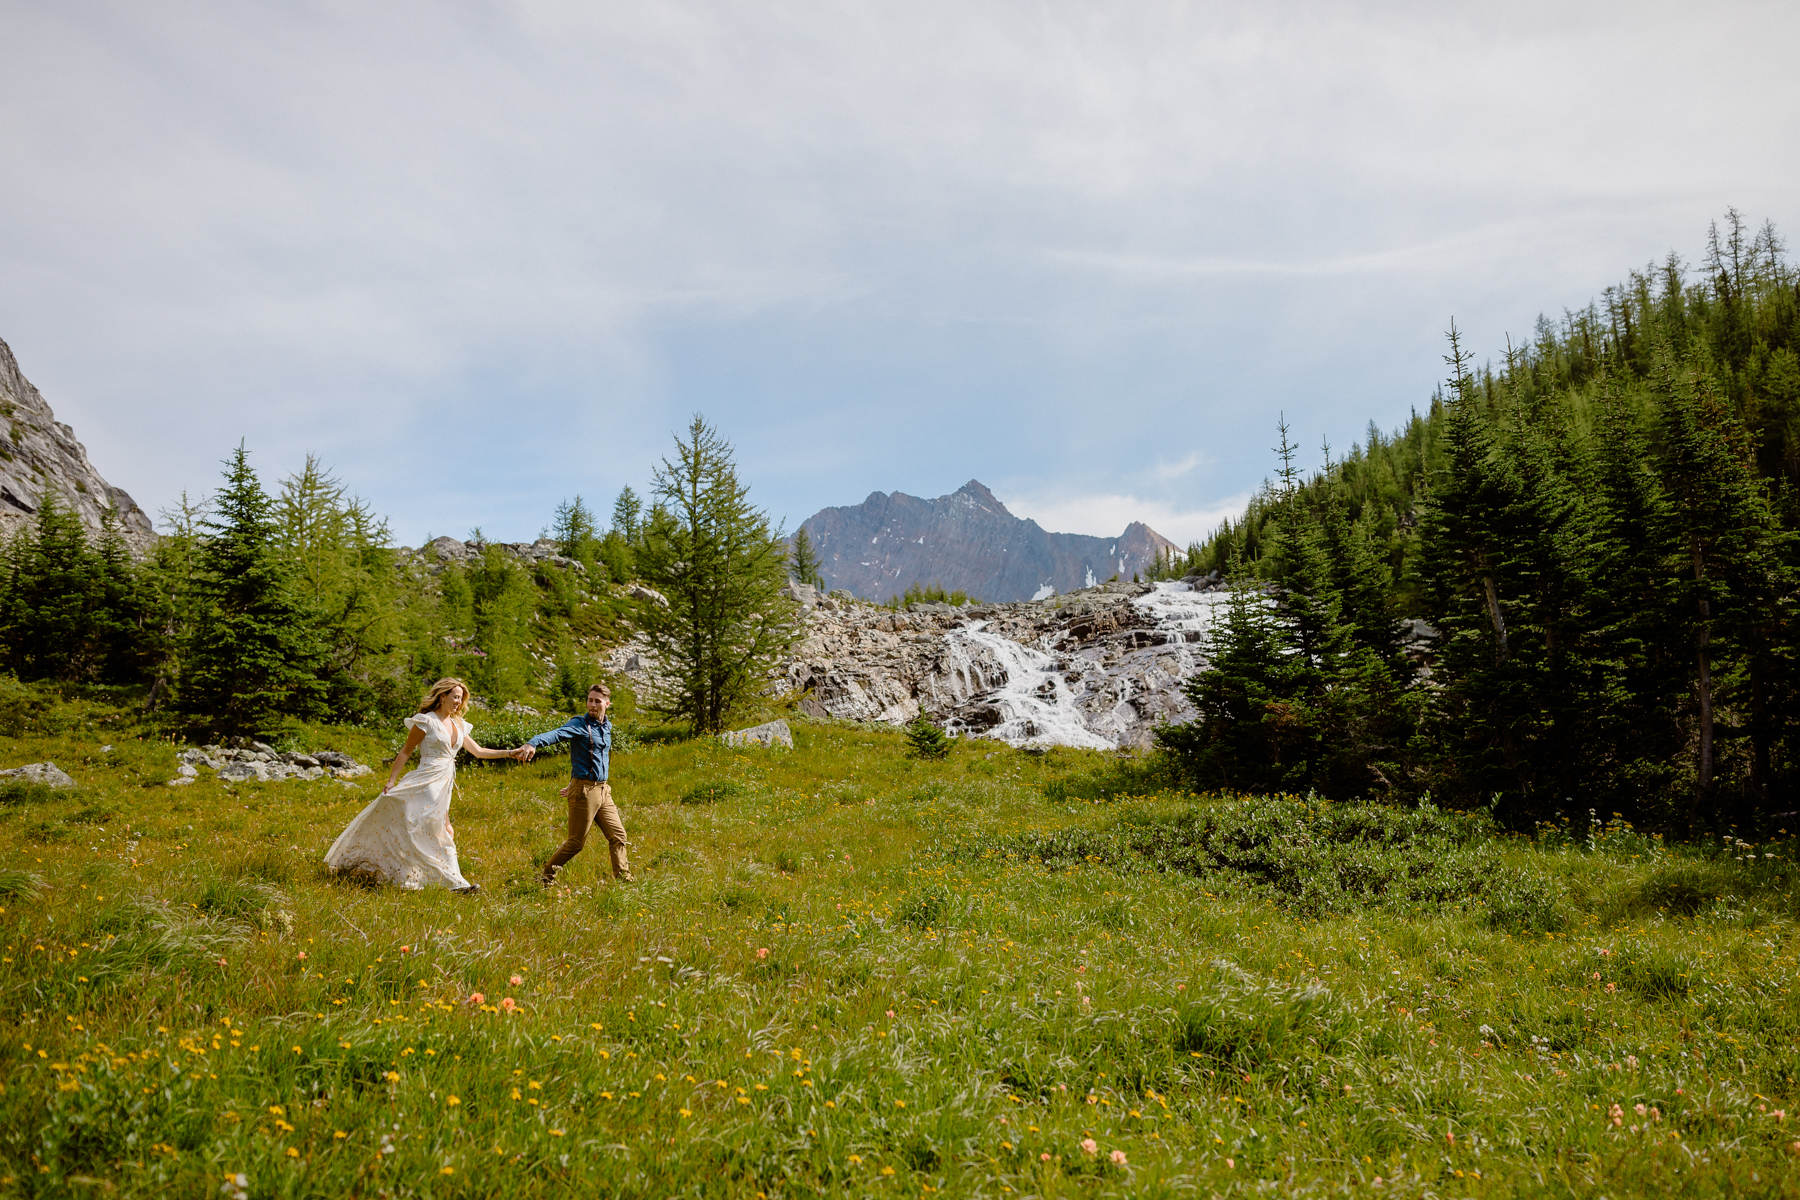 Adventure Elopement Photographers at a Hiking Wedding near Invermere - Photo 53